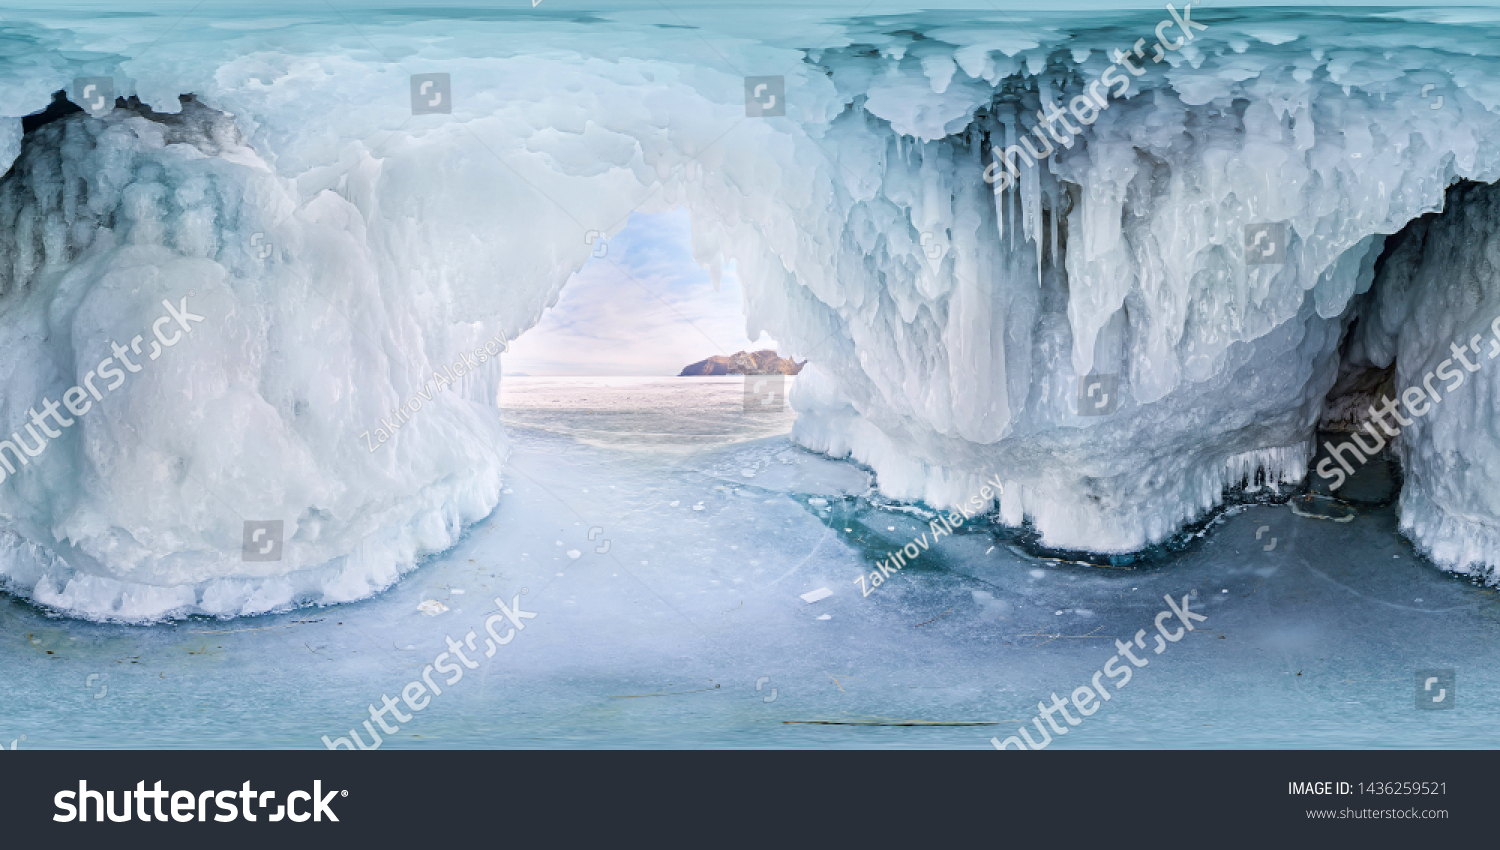 Blue Ice cave grotto on Olkhon Island, Lake Baikal, covered with icicles. Spherical panorama 360vr #1436259521